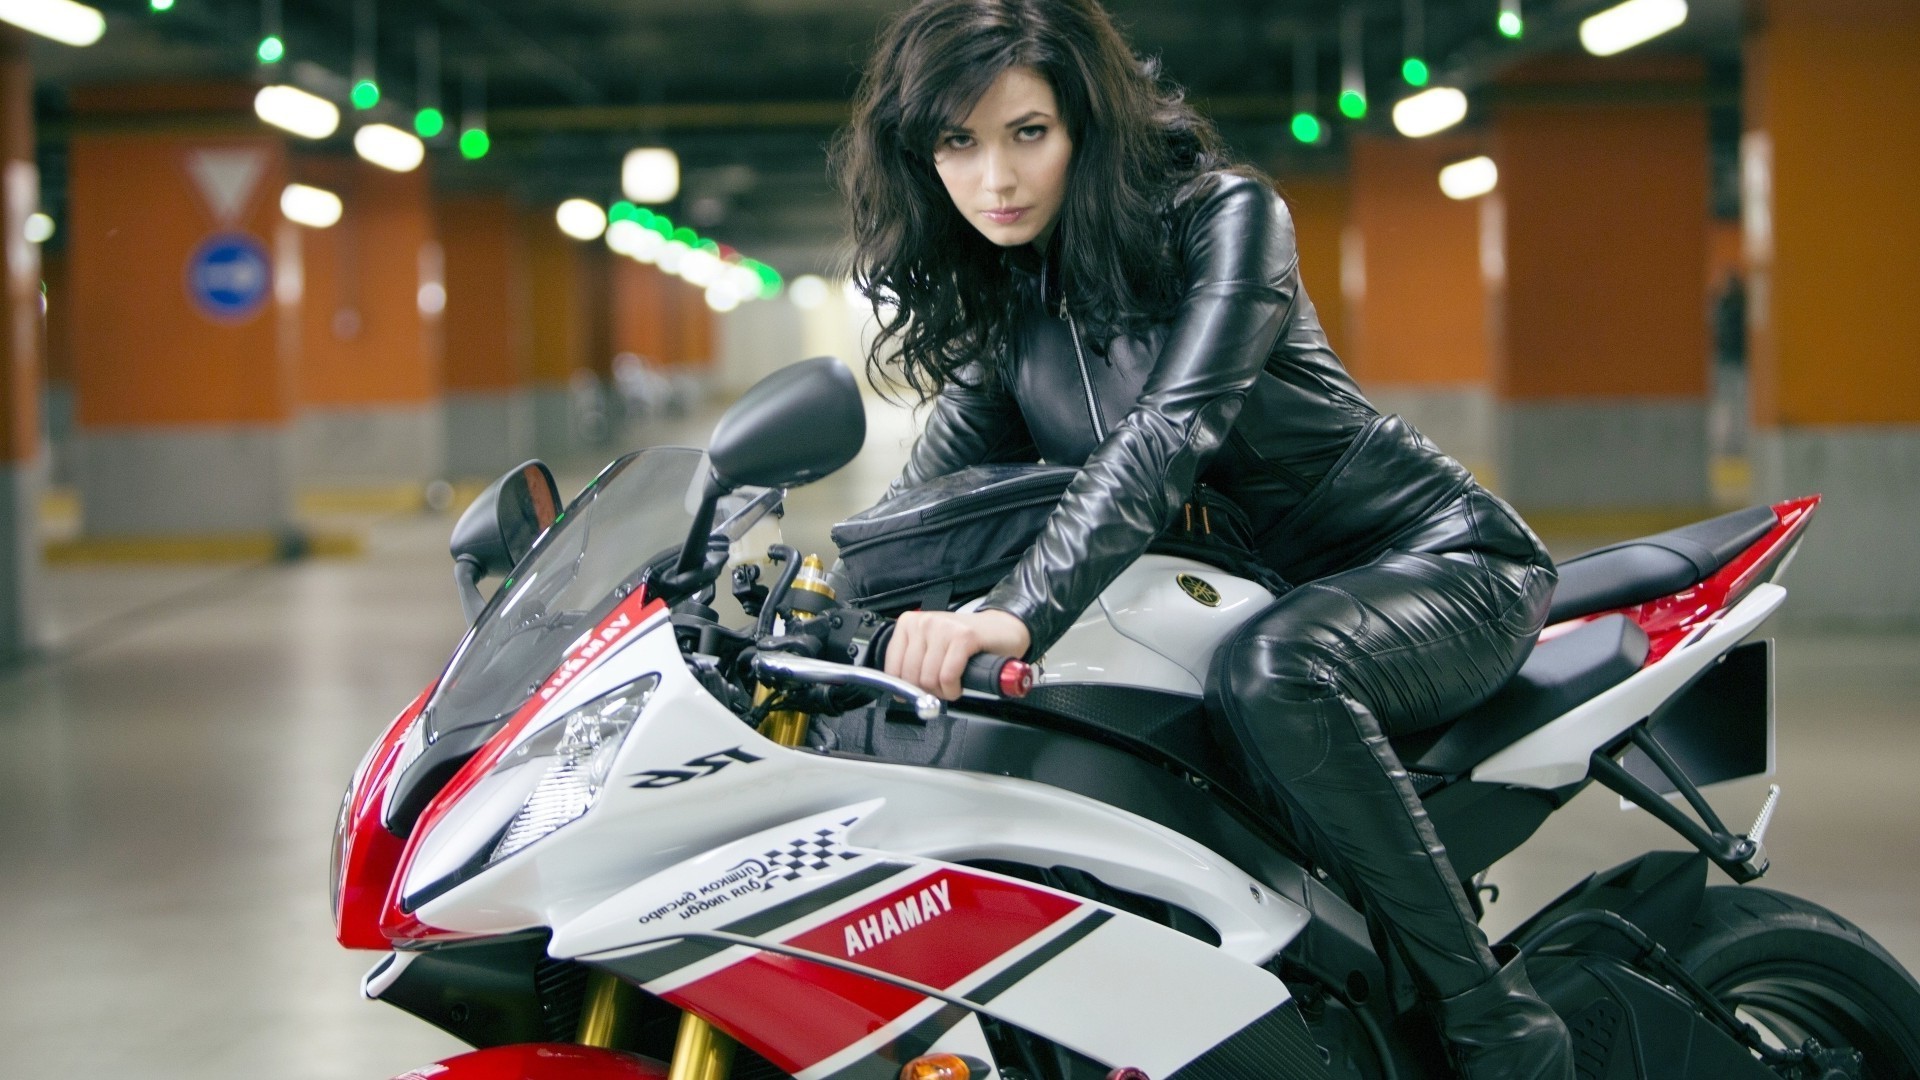 girls and motorcycles race track vehicle competition auto racing fast championship hurry bike woman